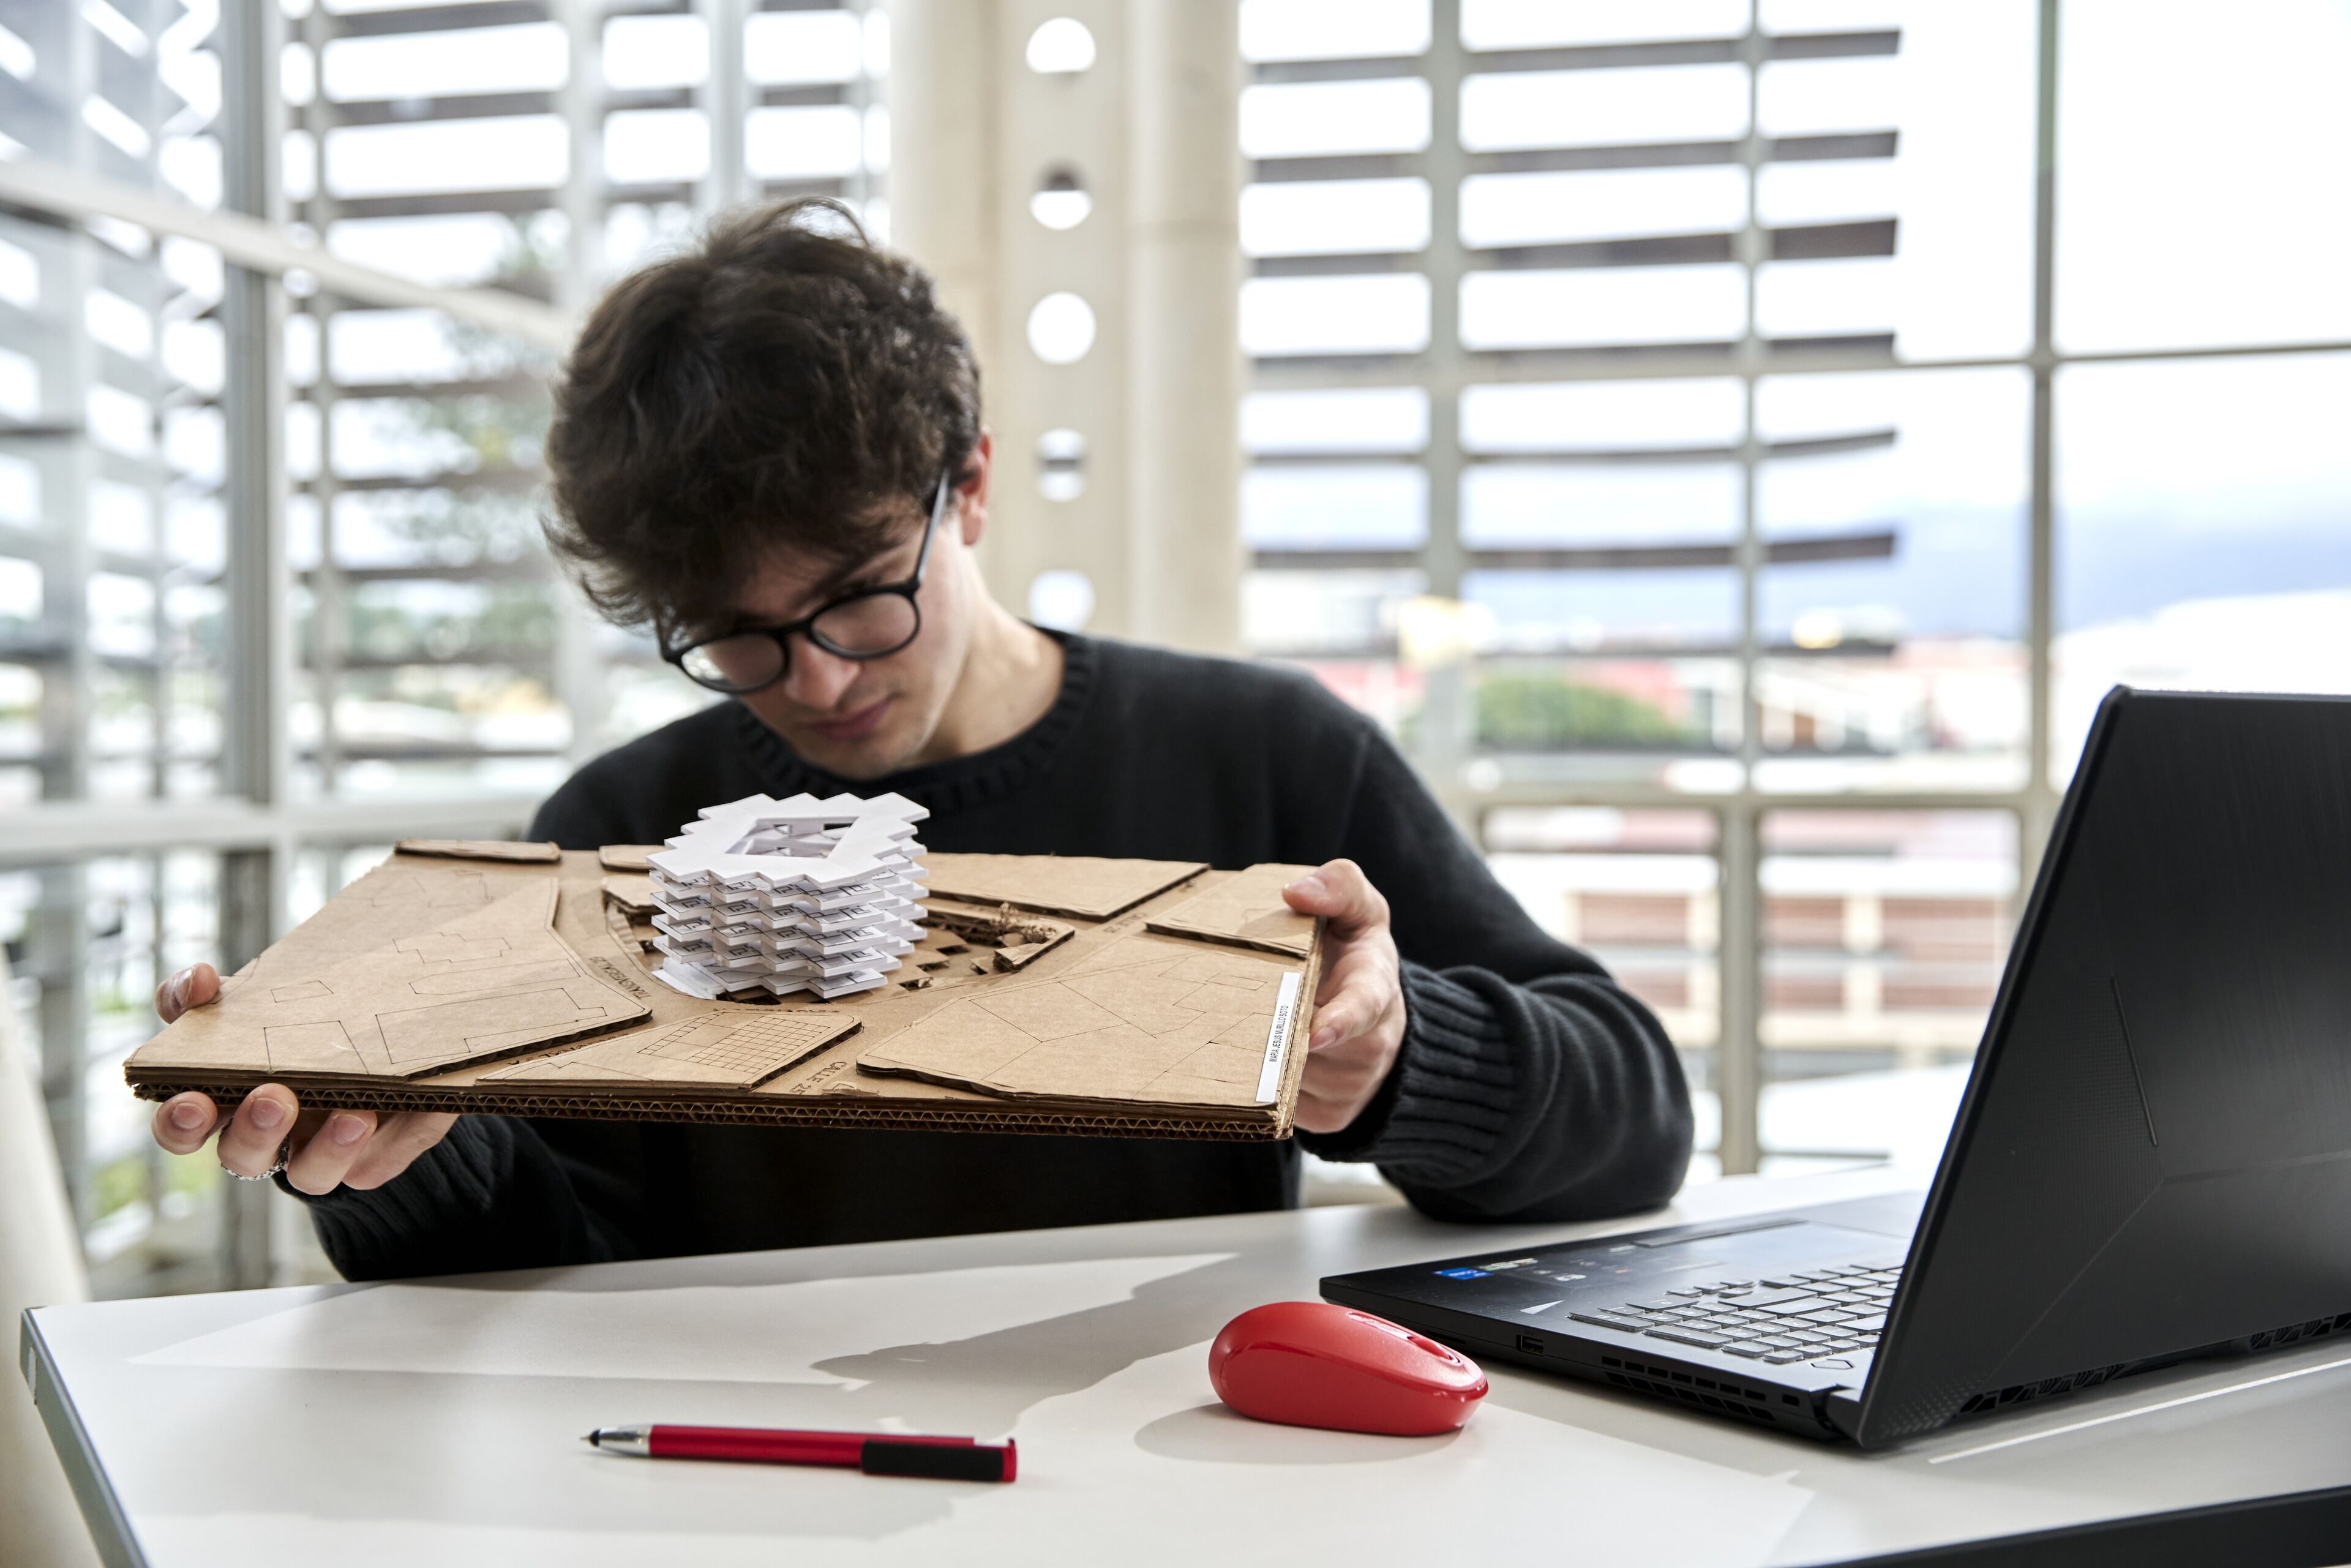 A young architect intently examines a white architectural model on a cardboard base, with a laptop and red mouse on the table.